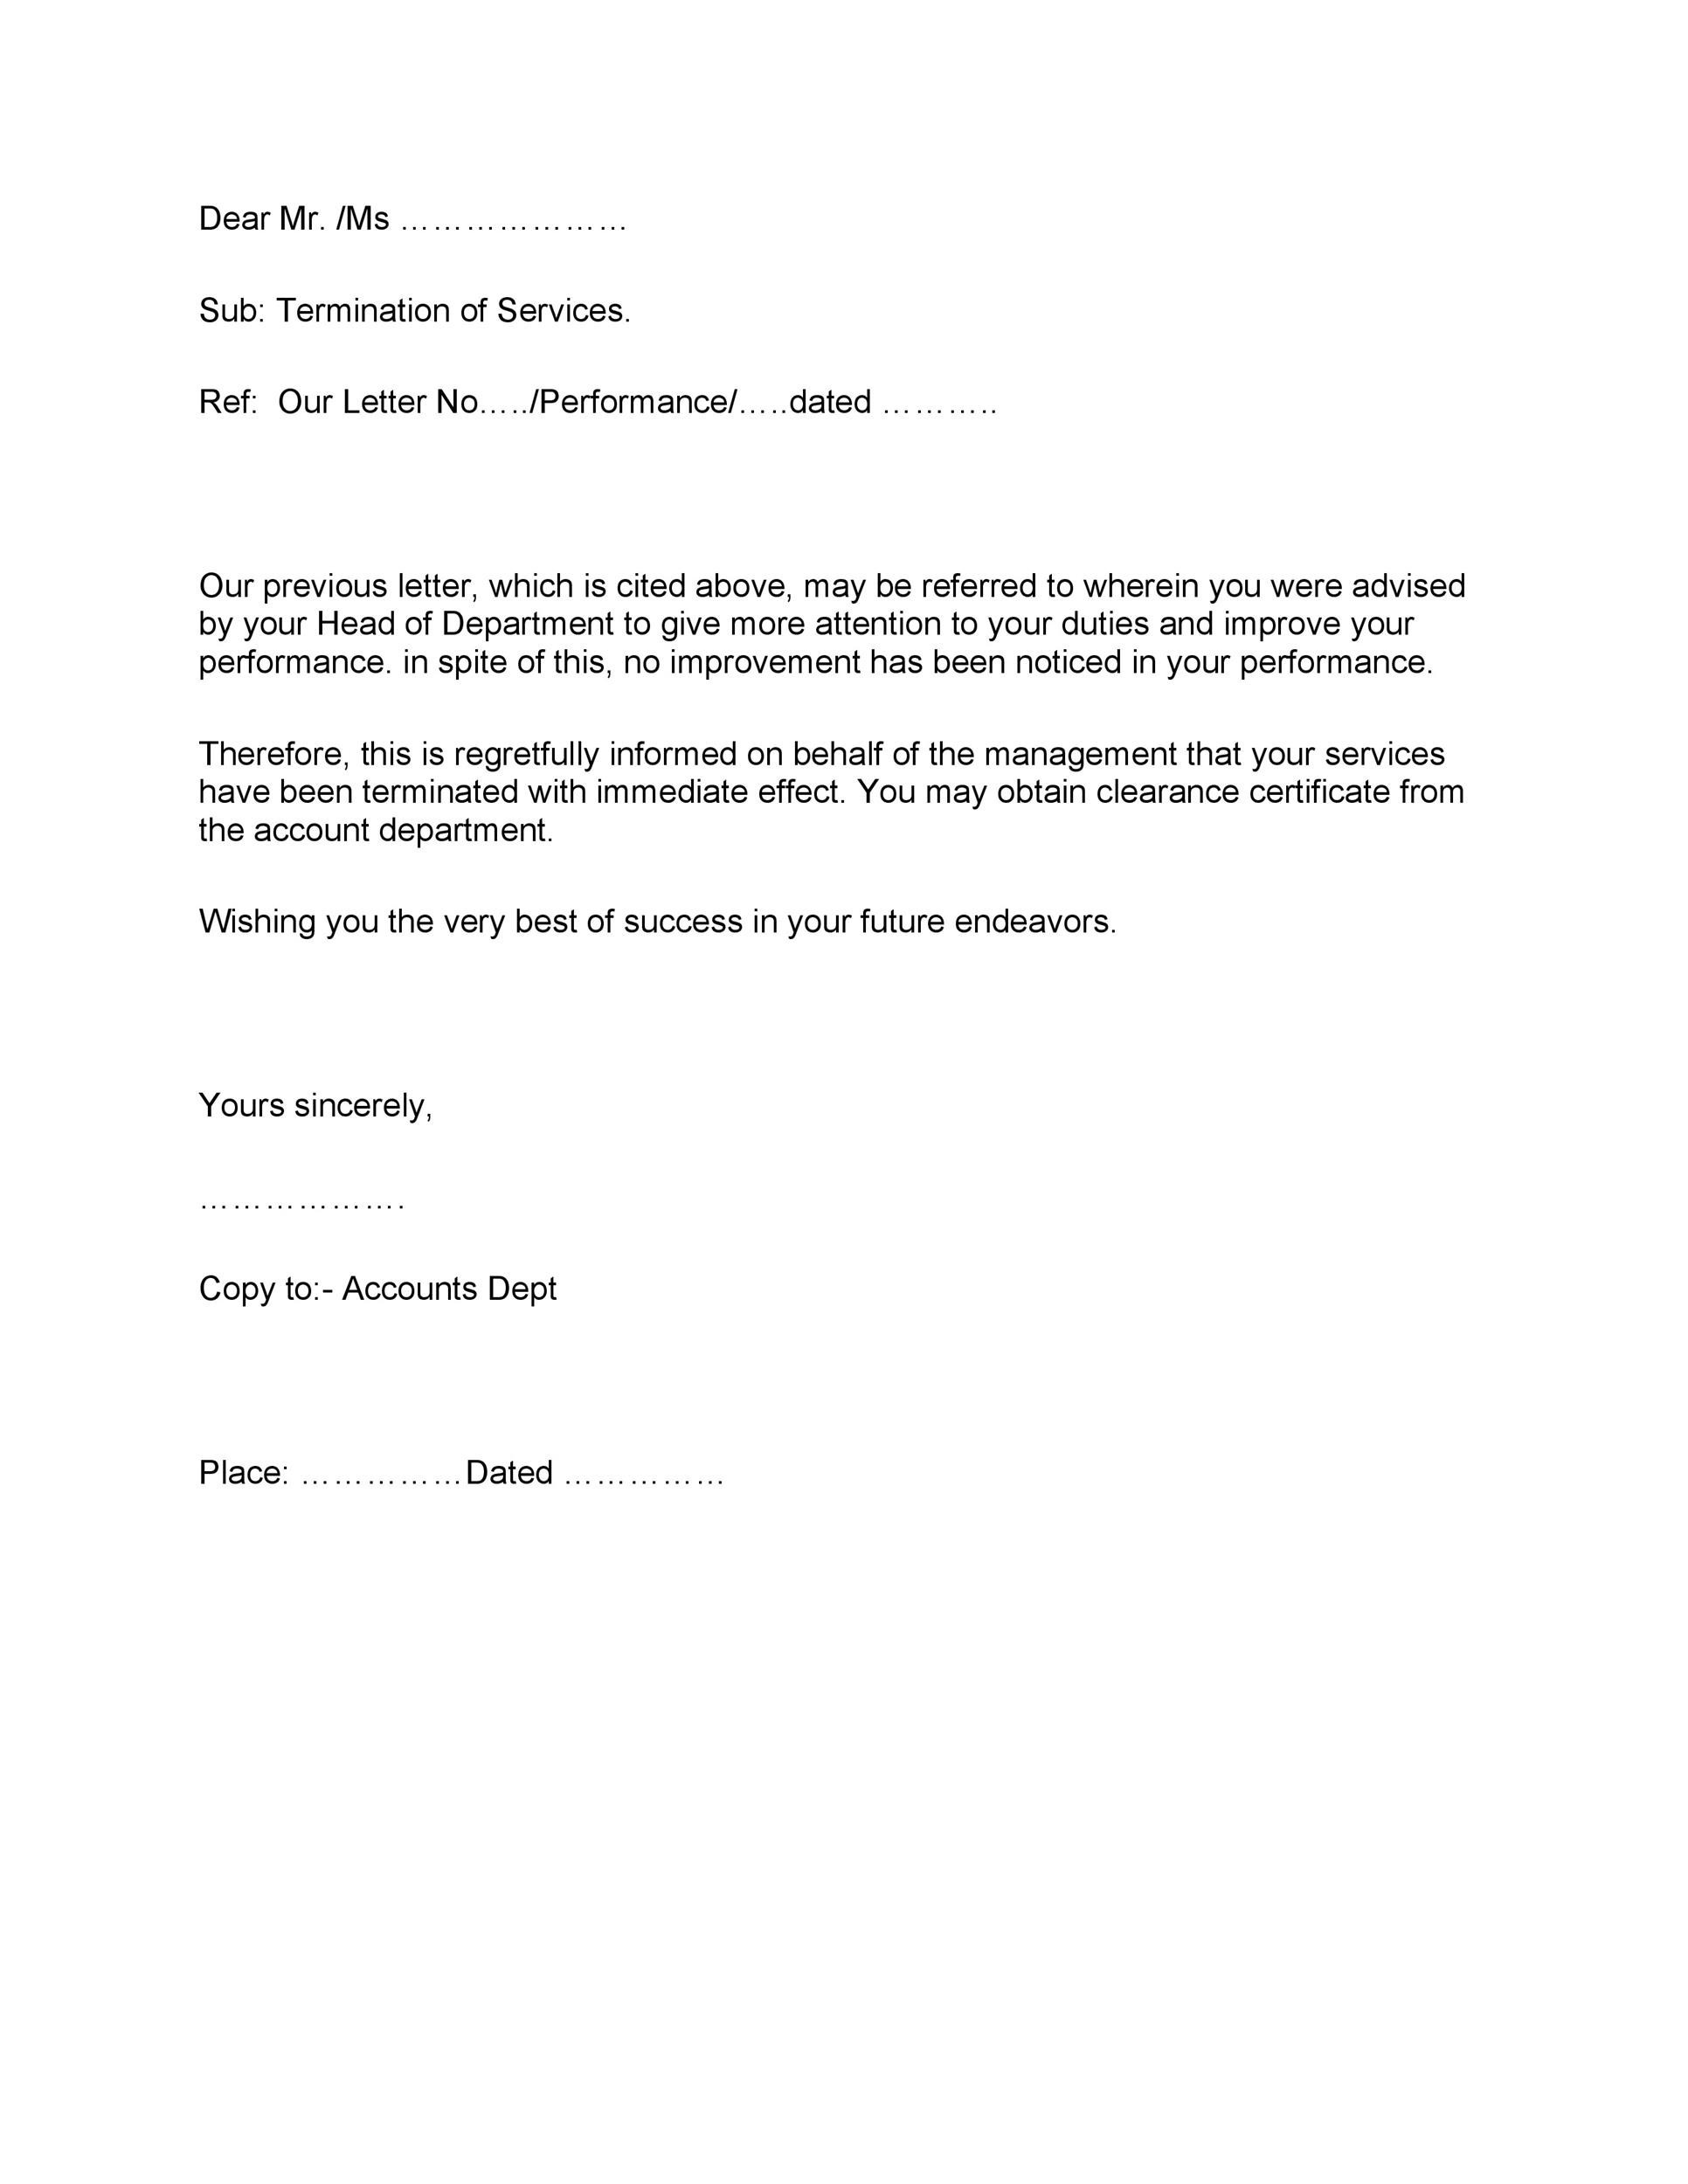 35 Perfect Termination Letter Samples [Lease, Employee ...